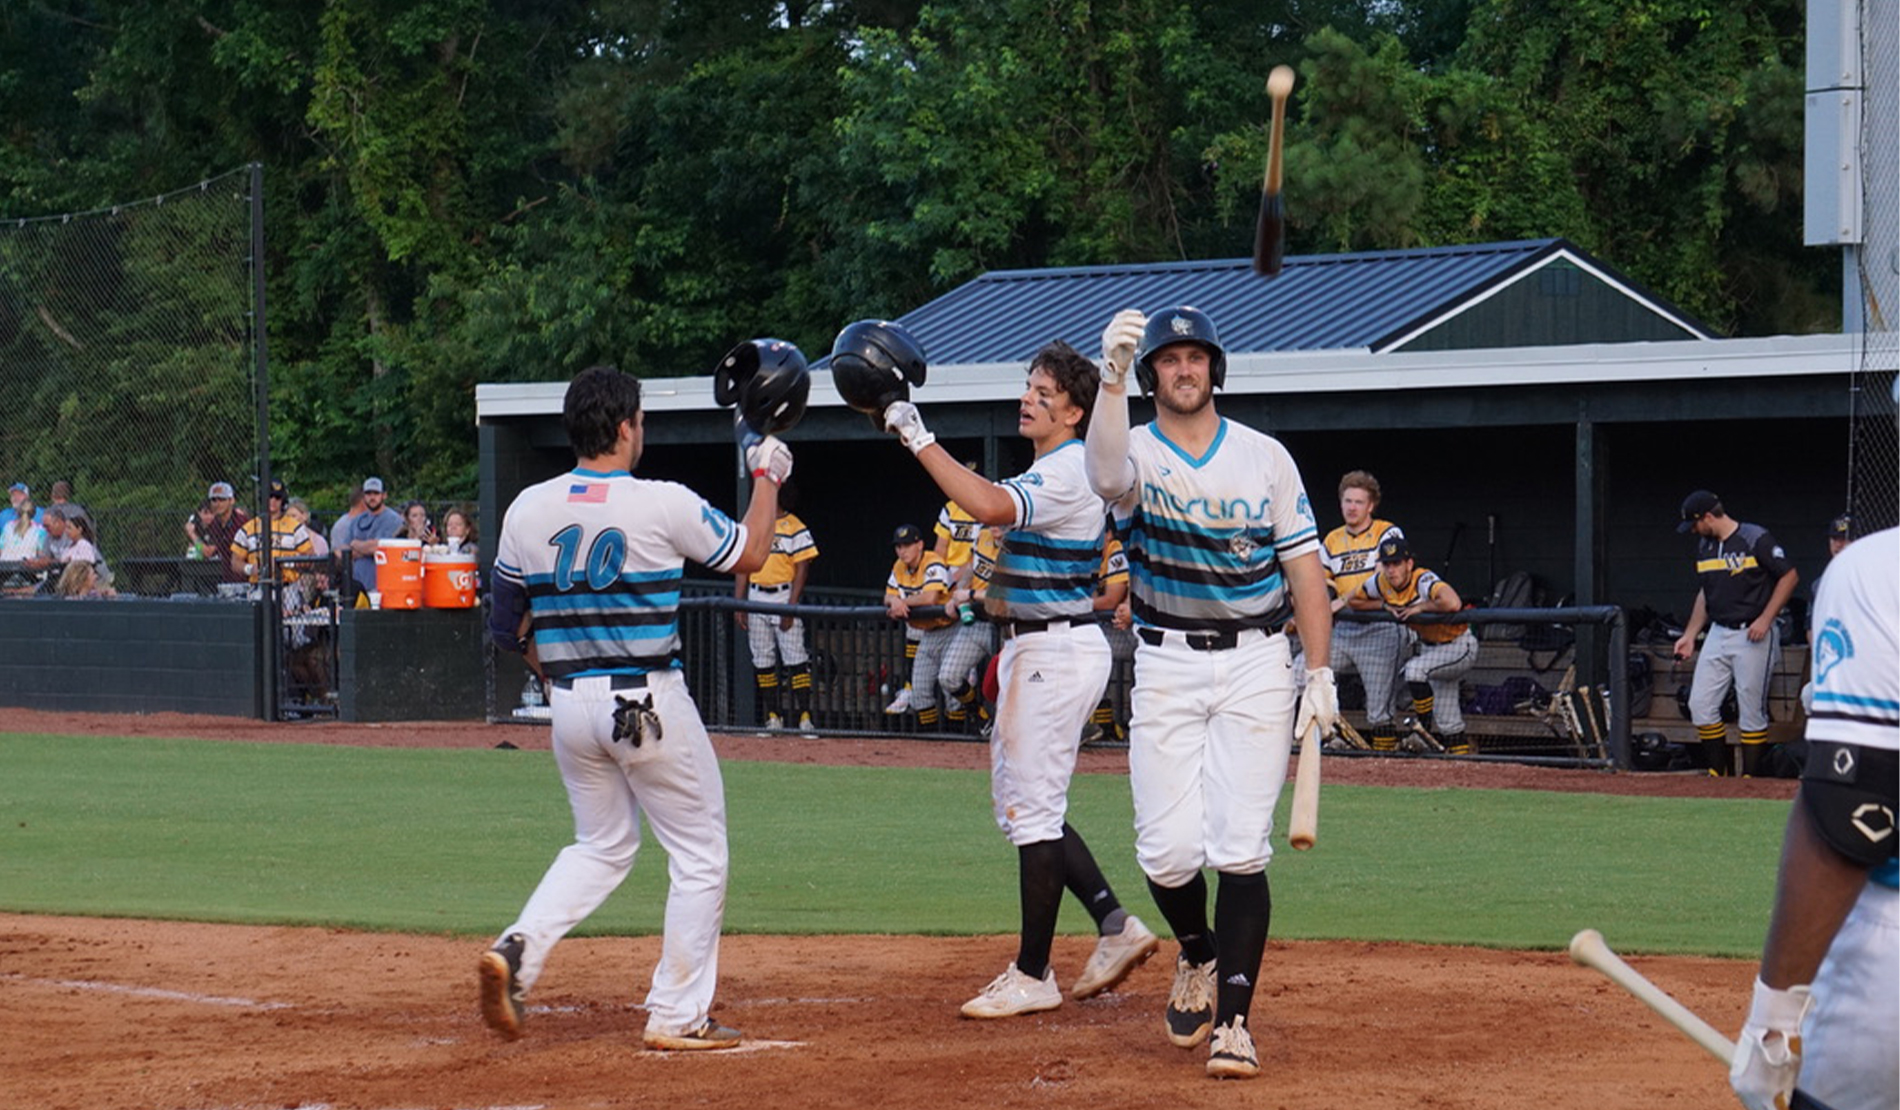 Marlins get back on track, beat Tobs on Friday night at The Rock